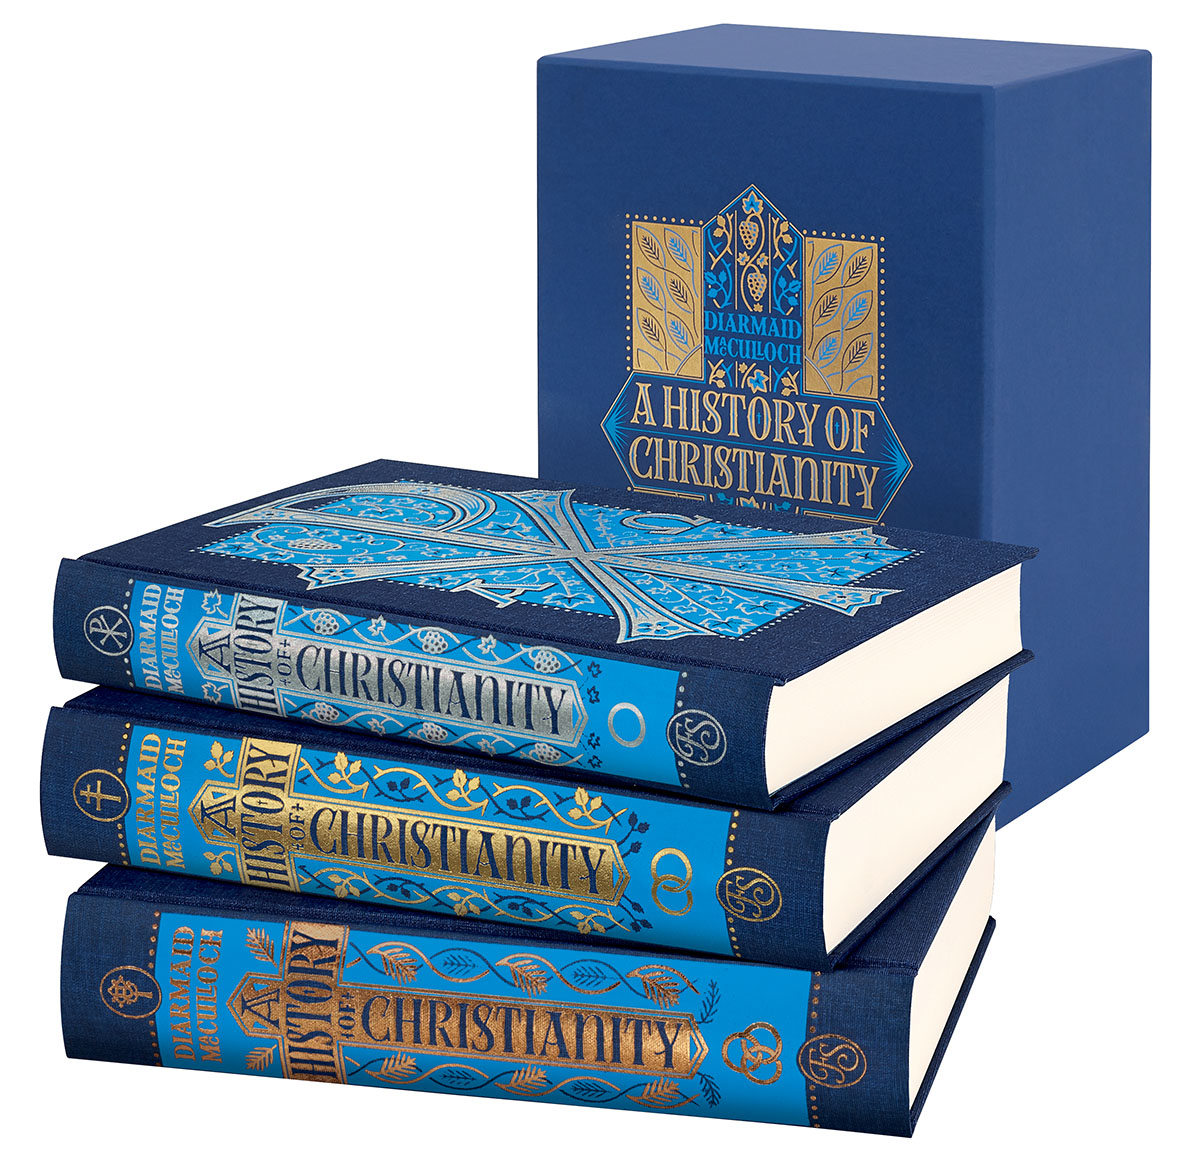 A History of Christianity, Slipcase books